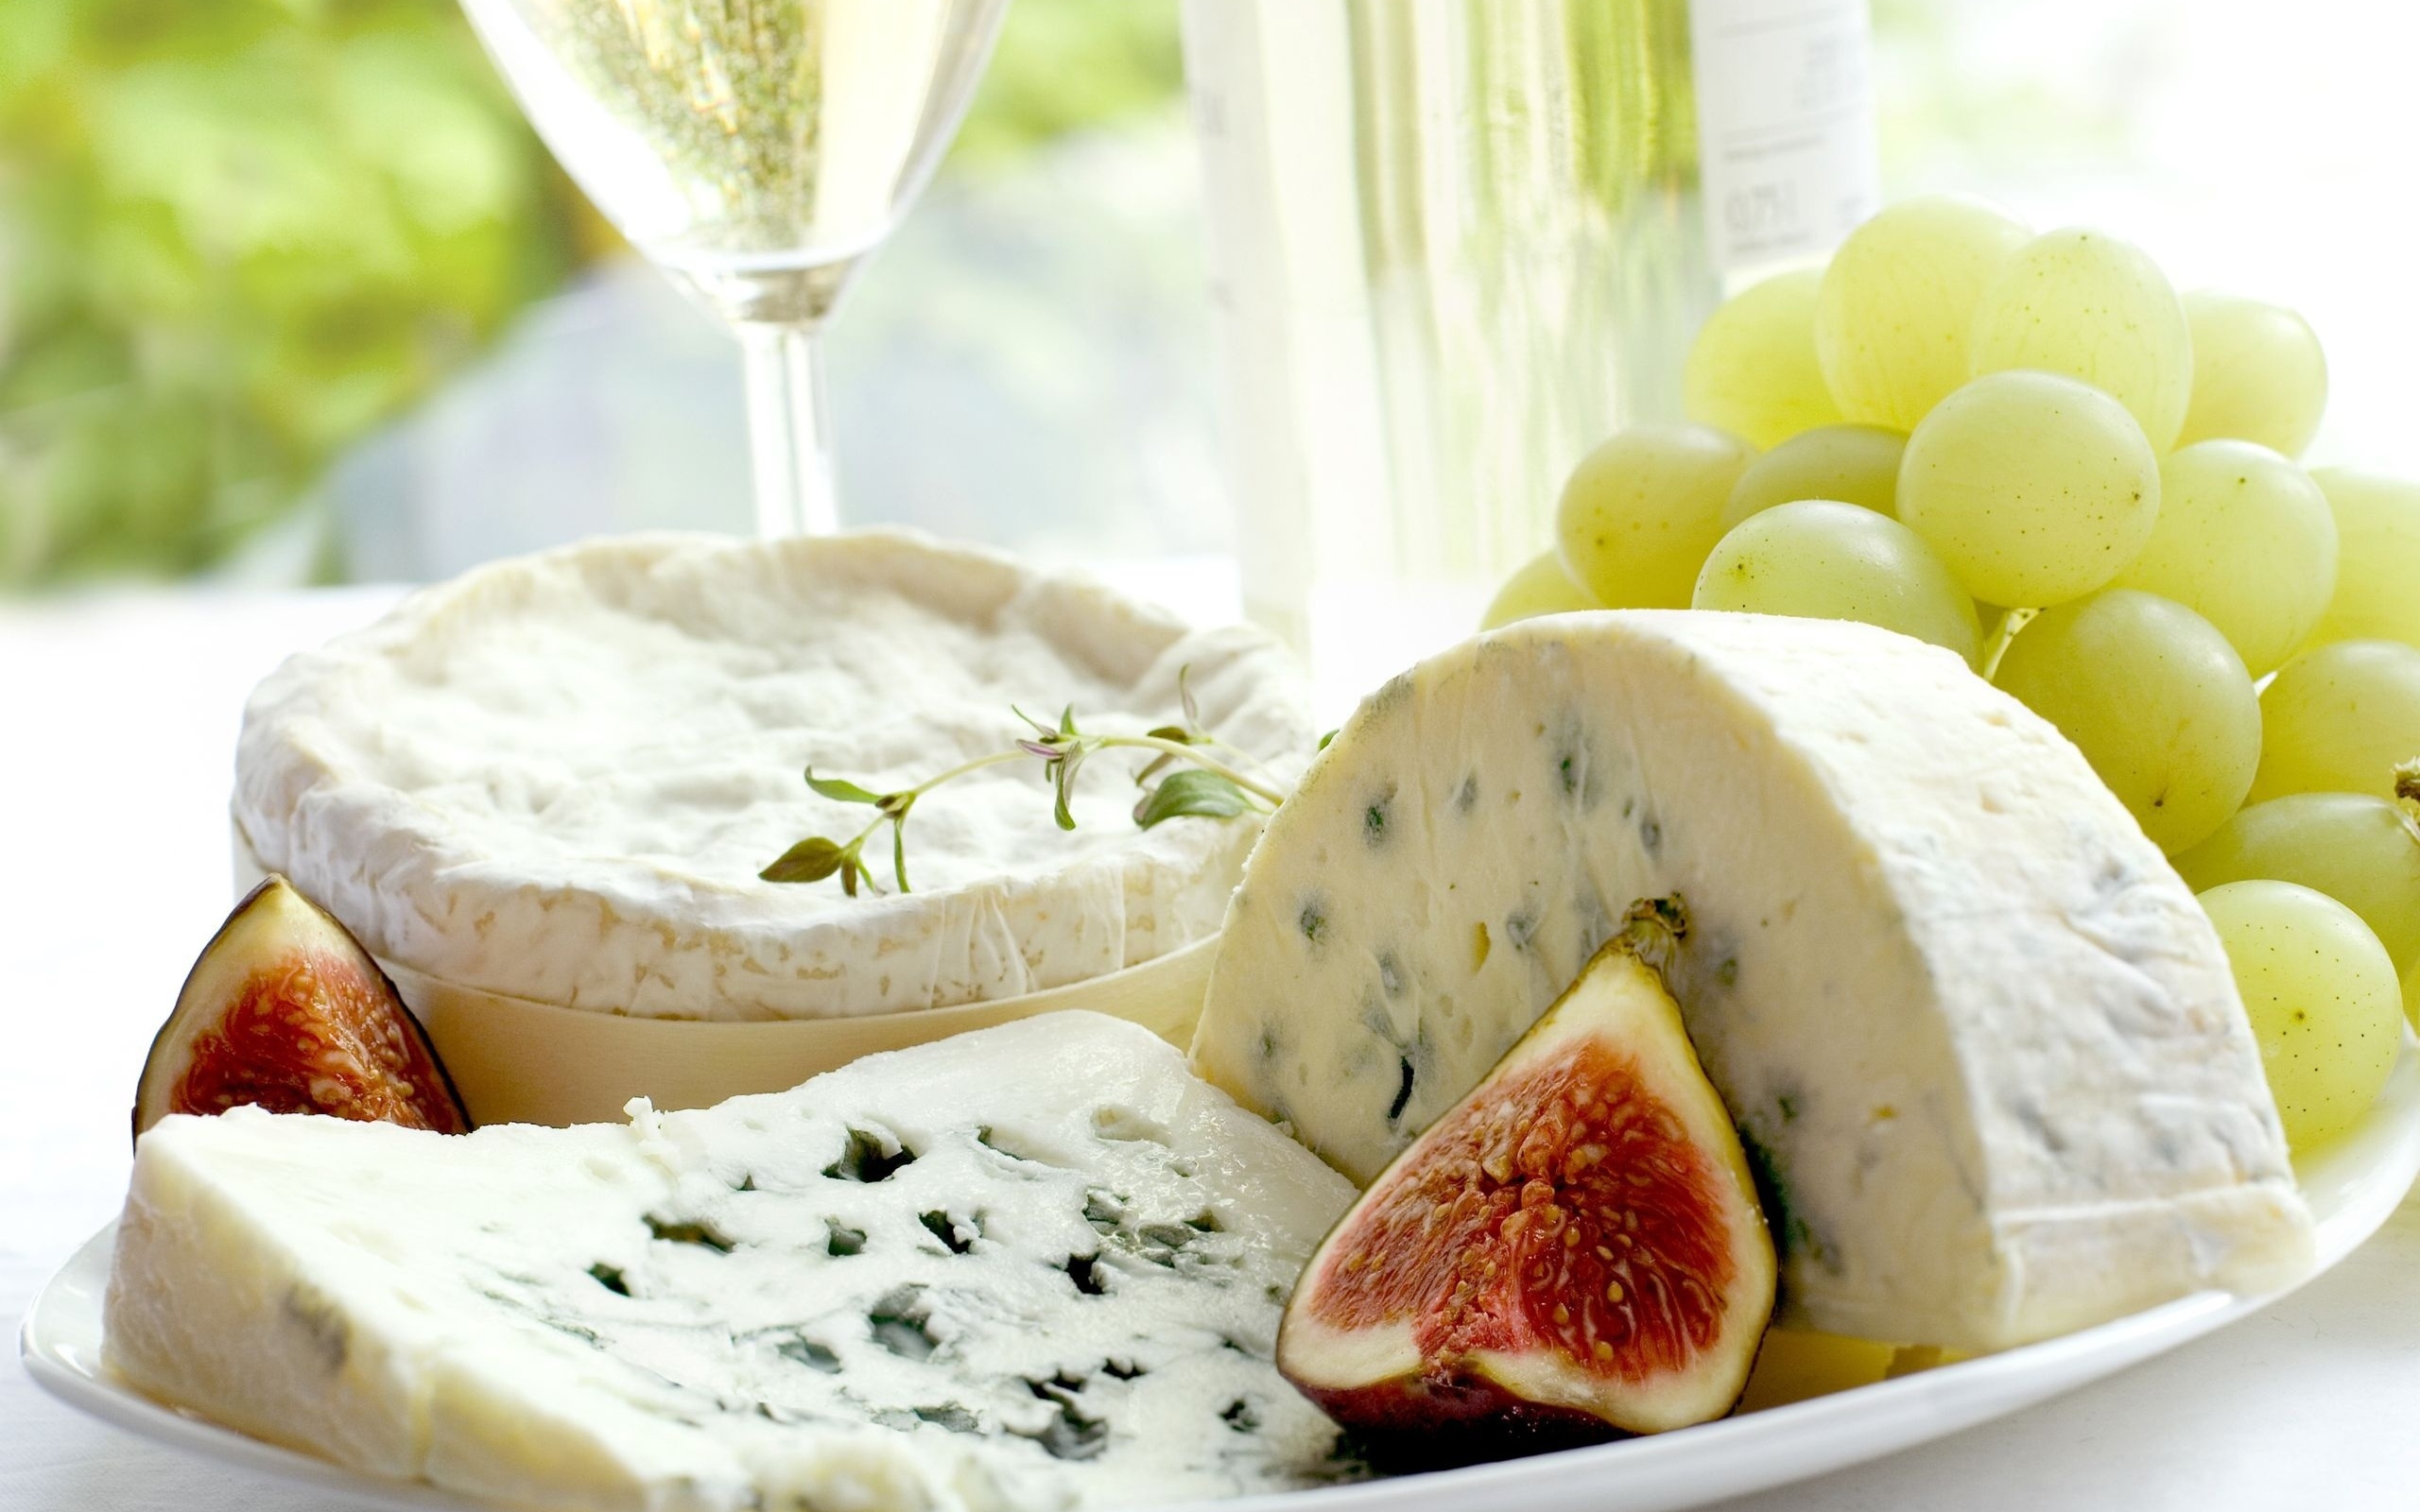 Expensive blue cheese on a plate with figs and white grapes